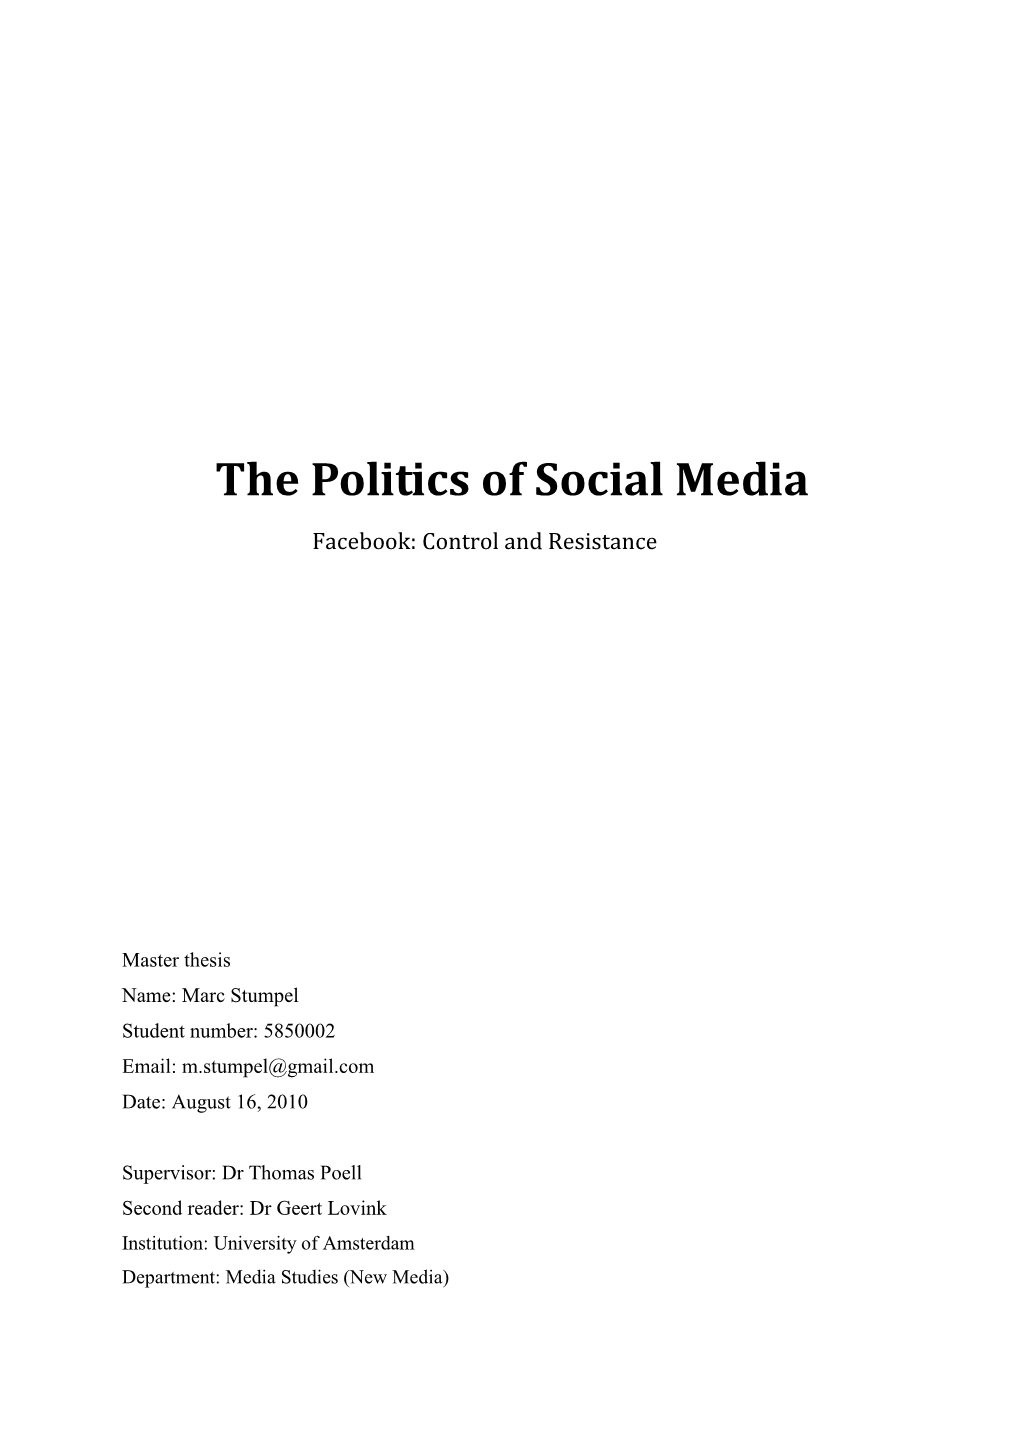 The Politics of Social Media. Facebook Control and Resistance